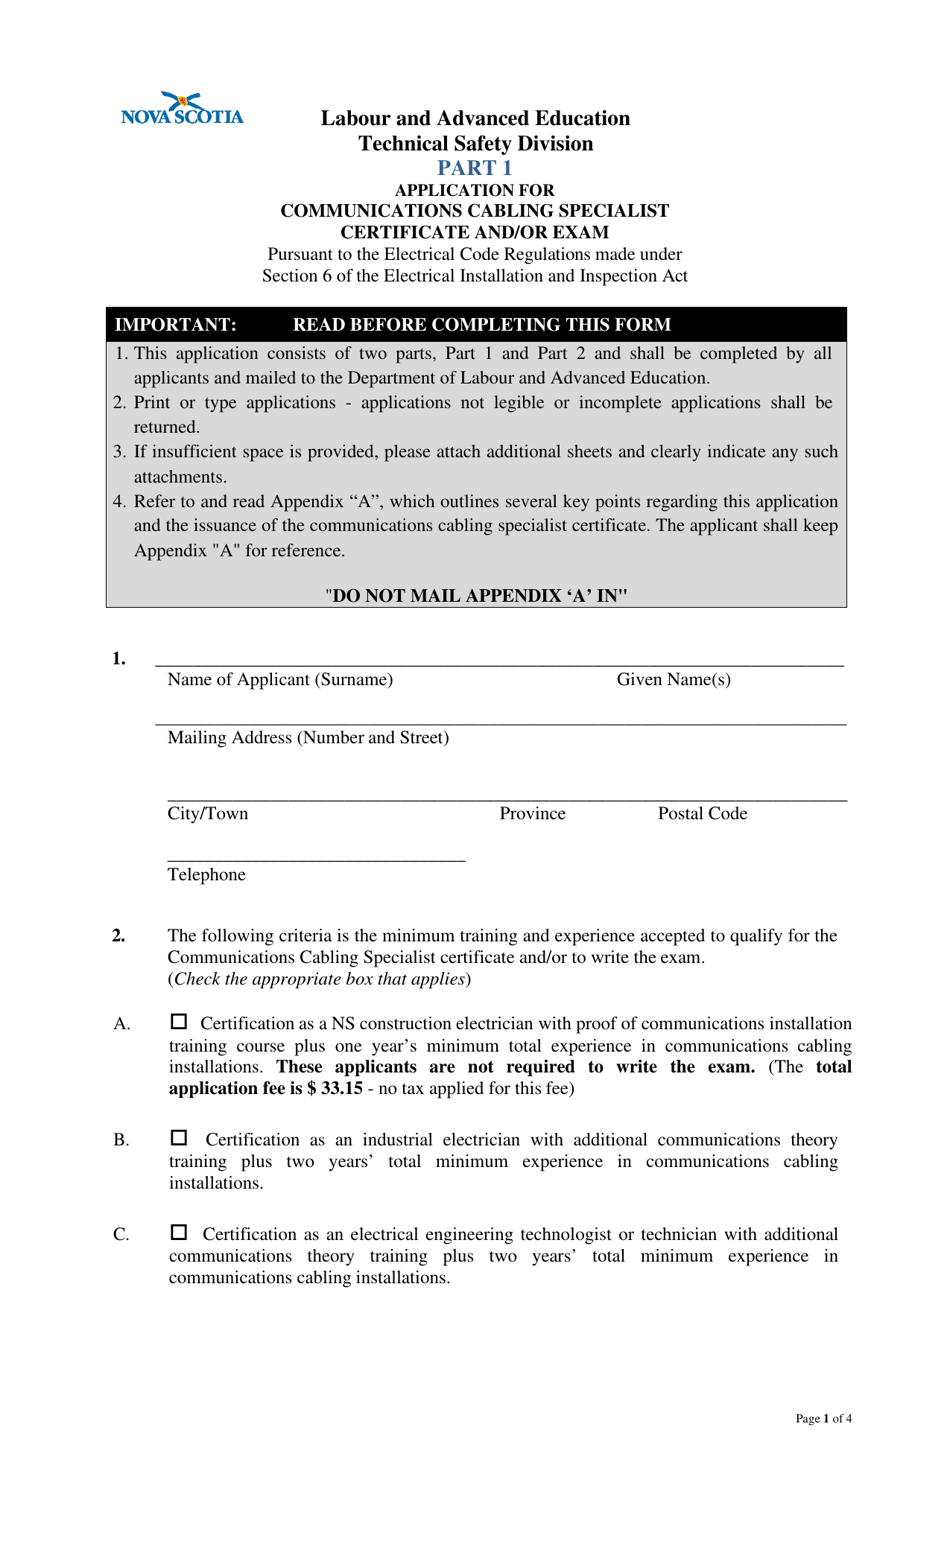 Application for Communications Cabling Specialist Certificate and / or Exam - Nova Scotia, Canada, Page 1